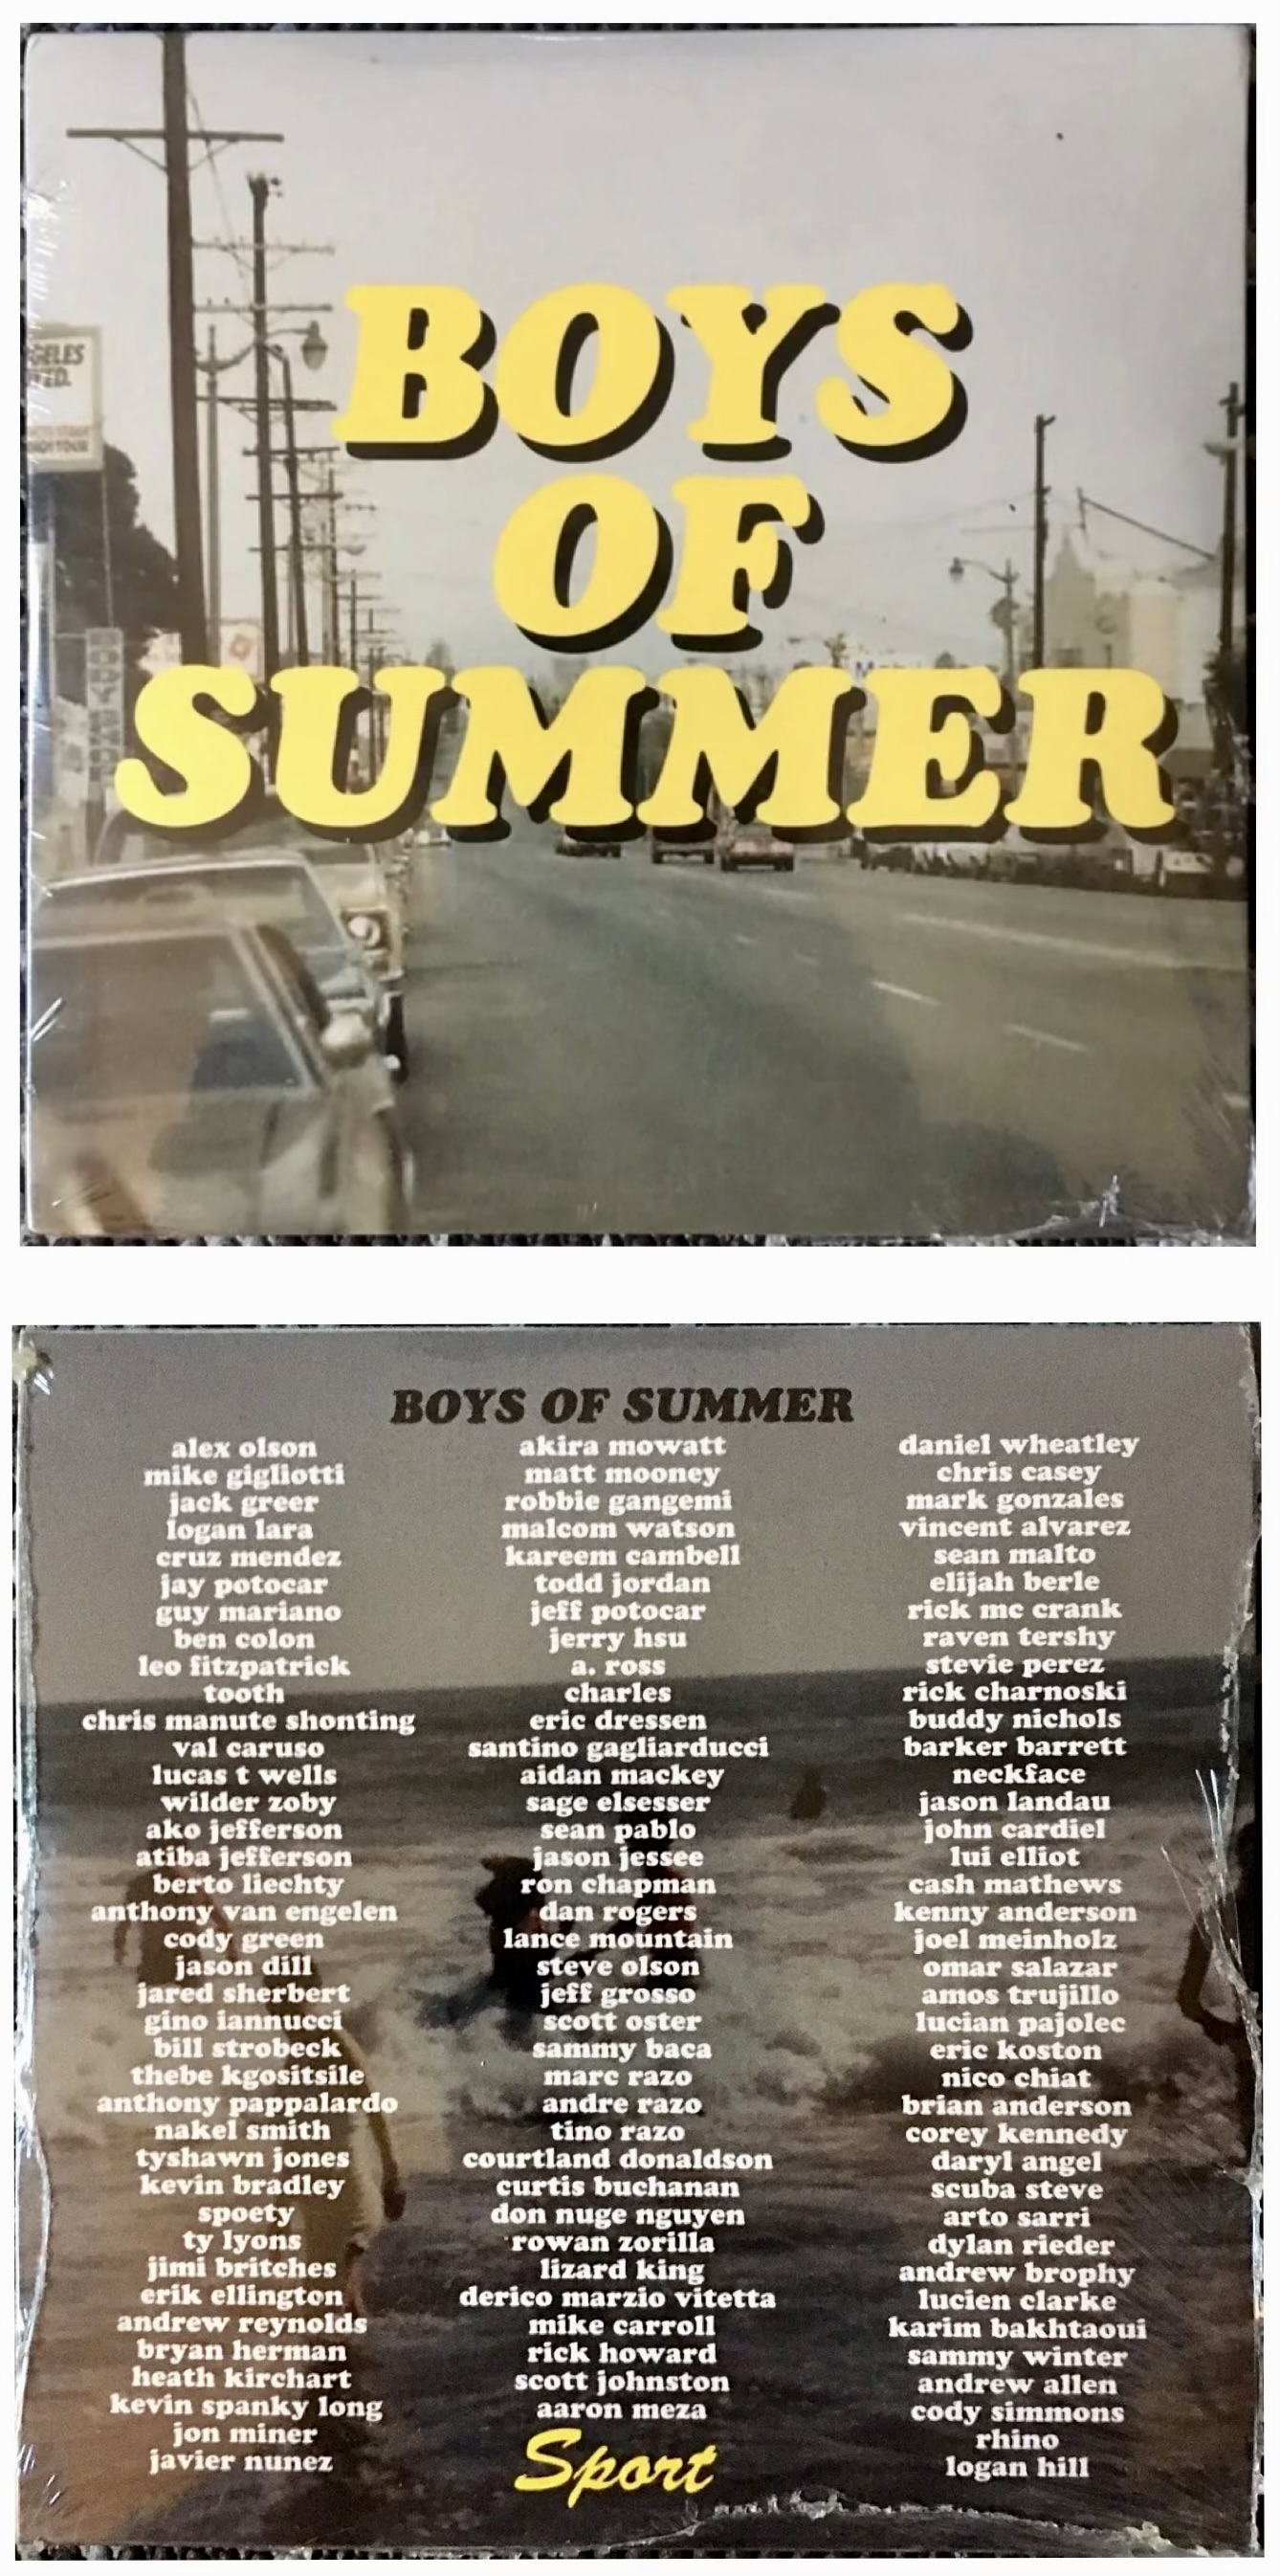 Boys Of Summer feature image